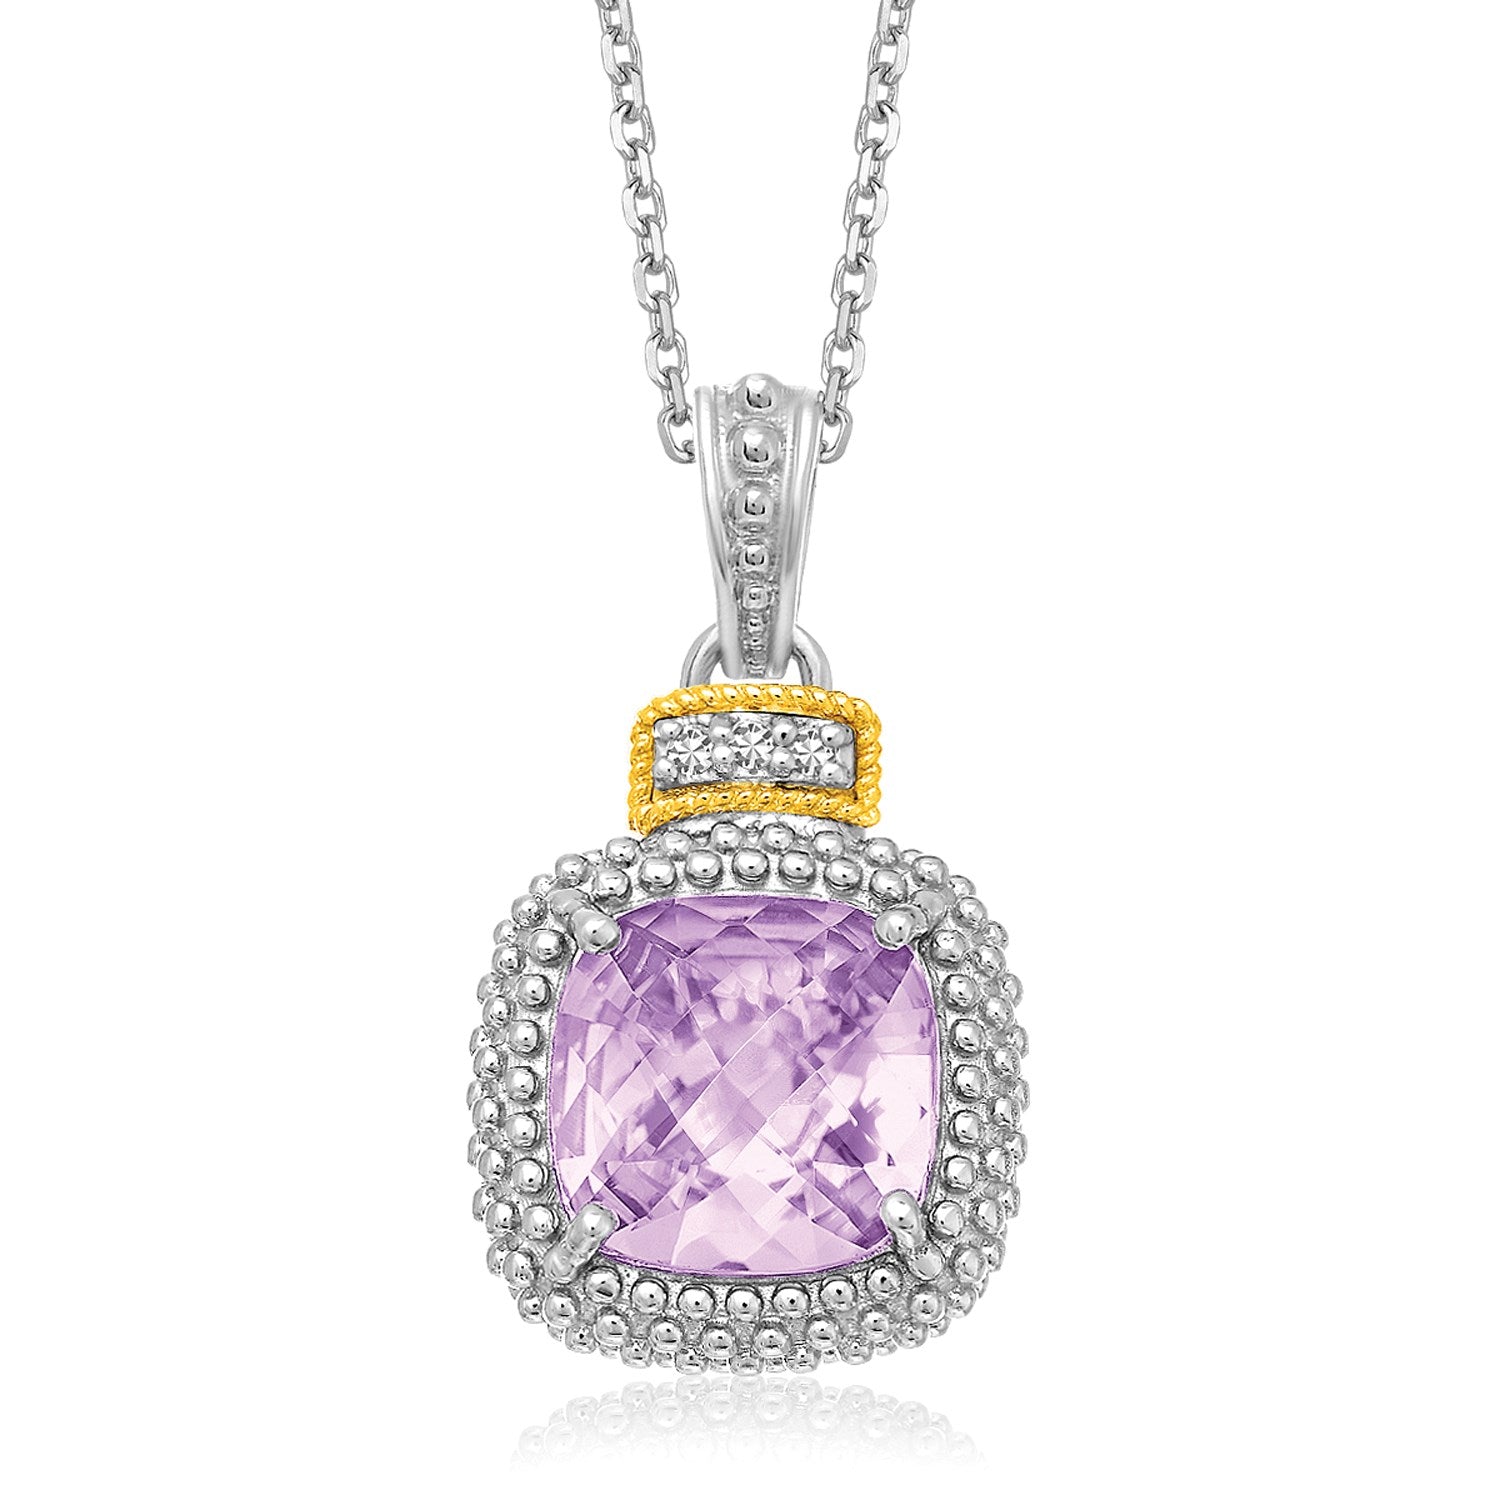 Amethyst and Diamond Popcorn Motif Cushion Pendant in 18k Yellow Gold and Sterling Silver